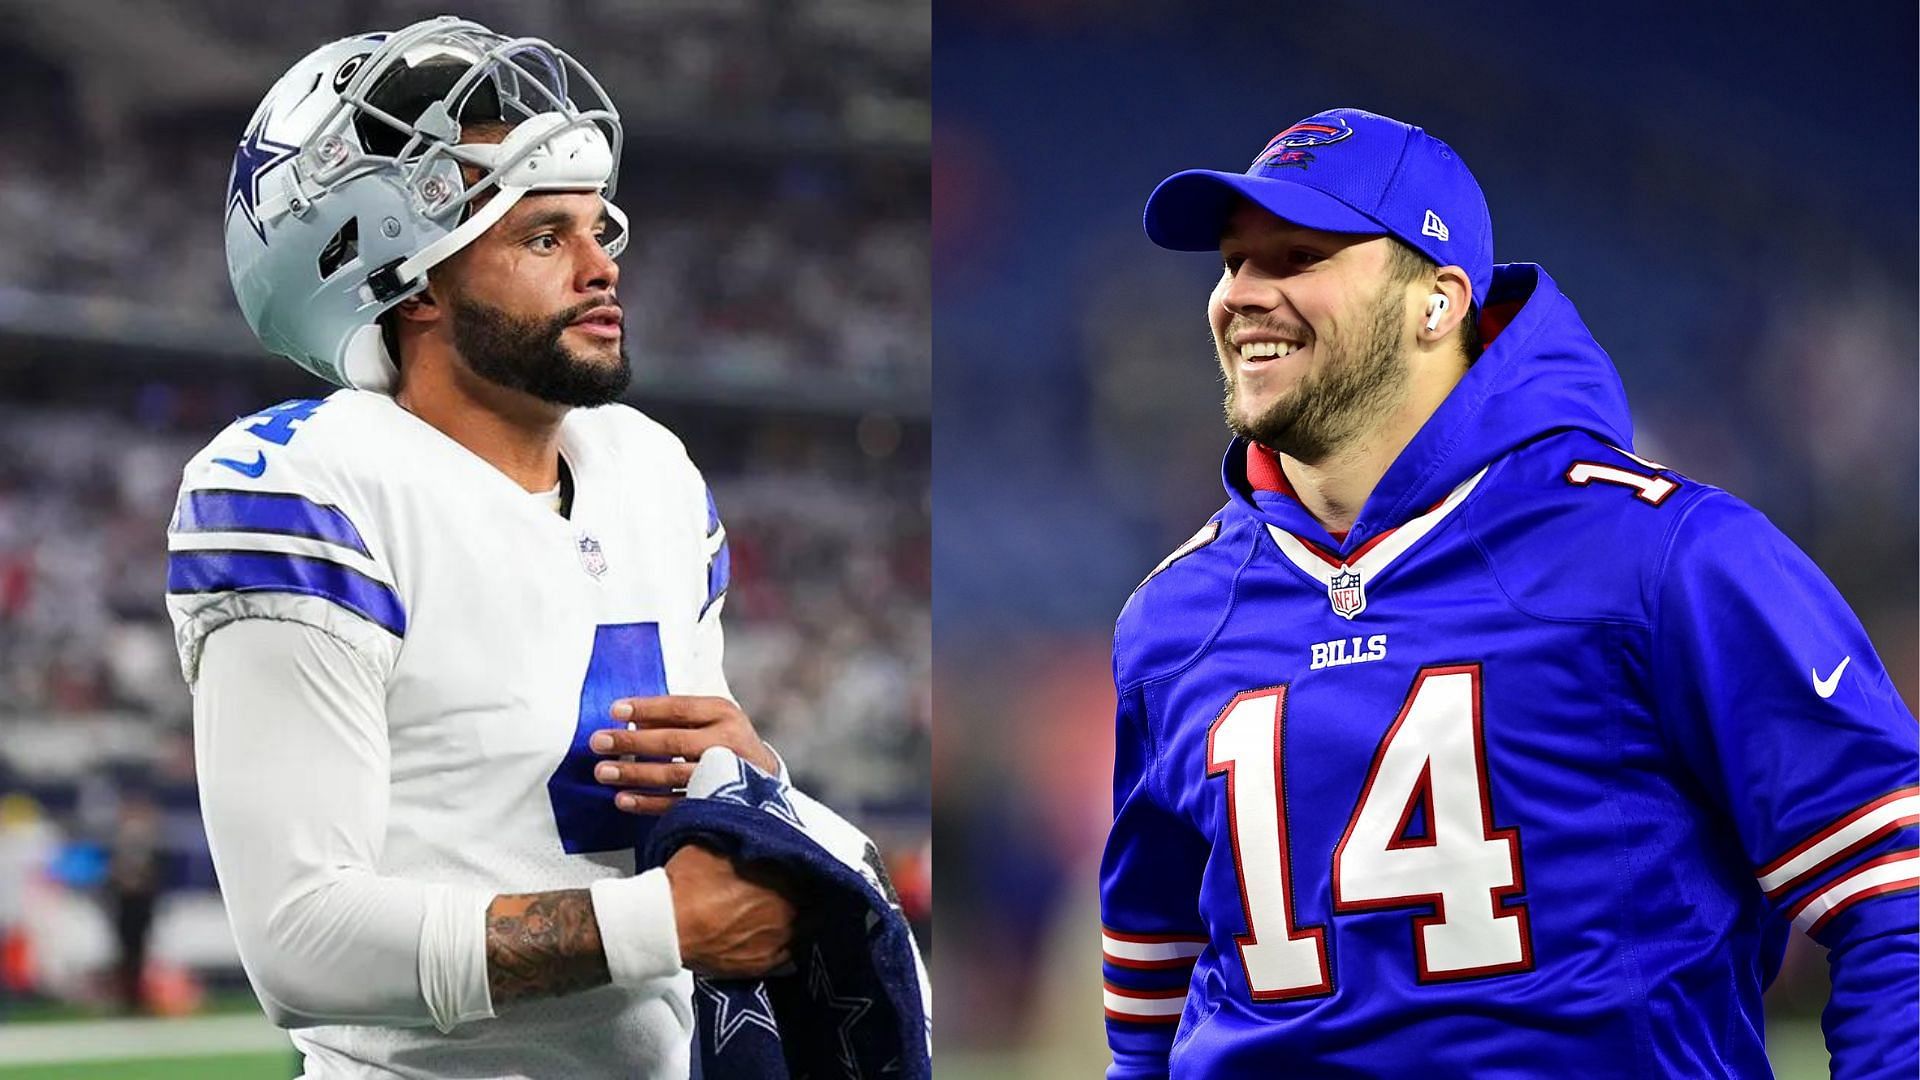 What radio station is the Cowboys-Bills game on? Details on NFL Week 15 coverage